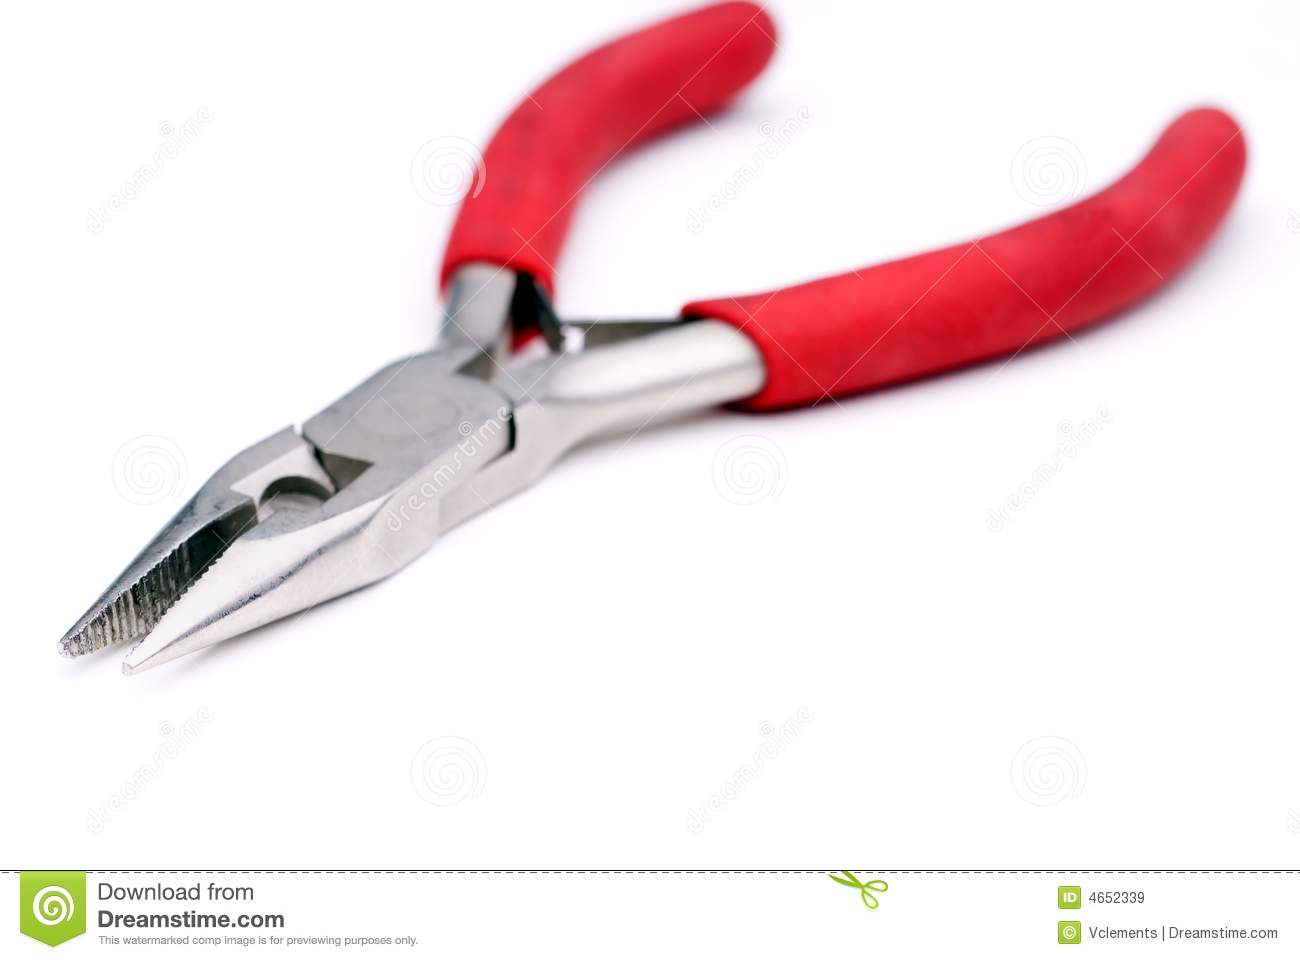 Needle Nose Pliers Royalty Free Stock Images   Image  4652339